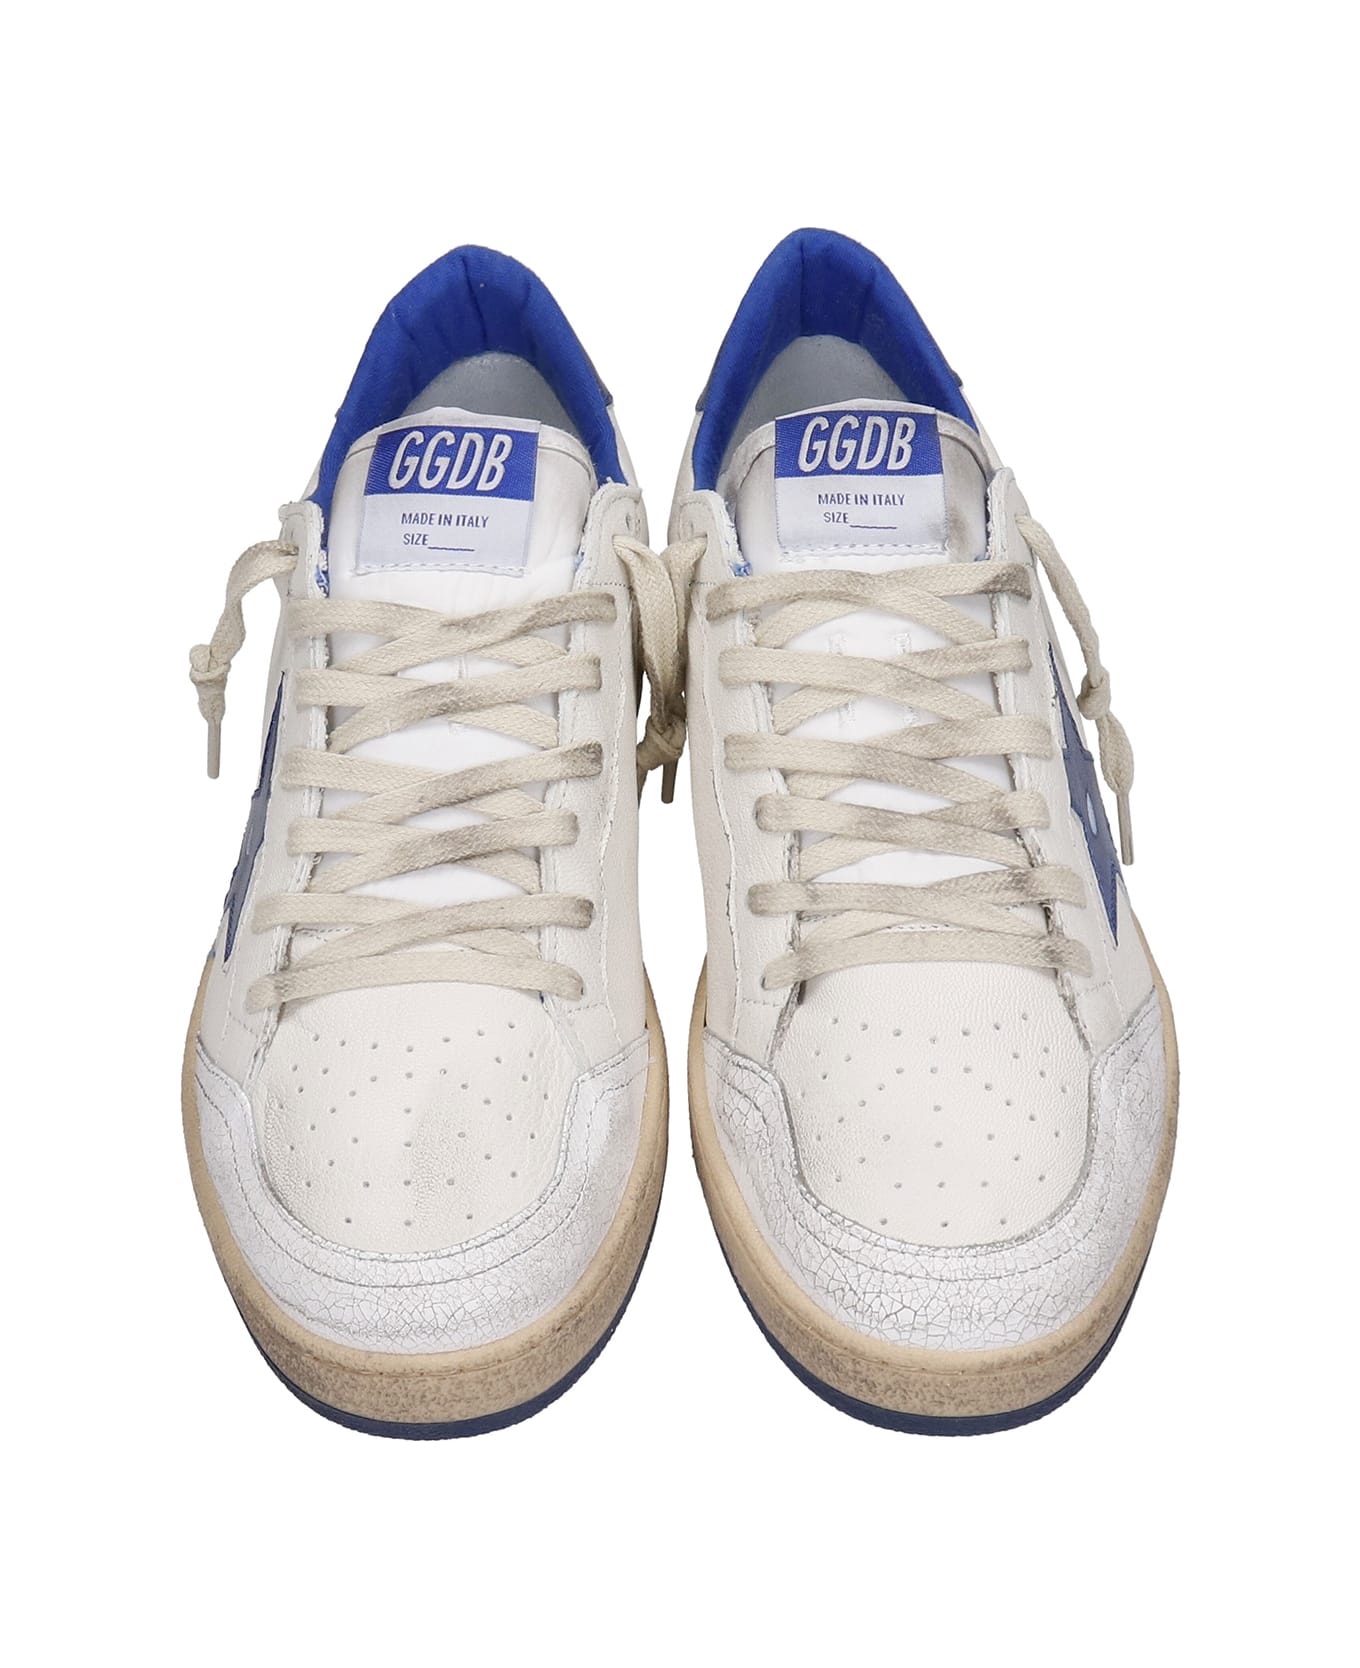 Golden Goose Ball Star Sneakers In White Leather - Bianco スニーカー